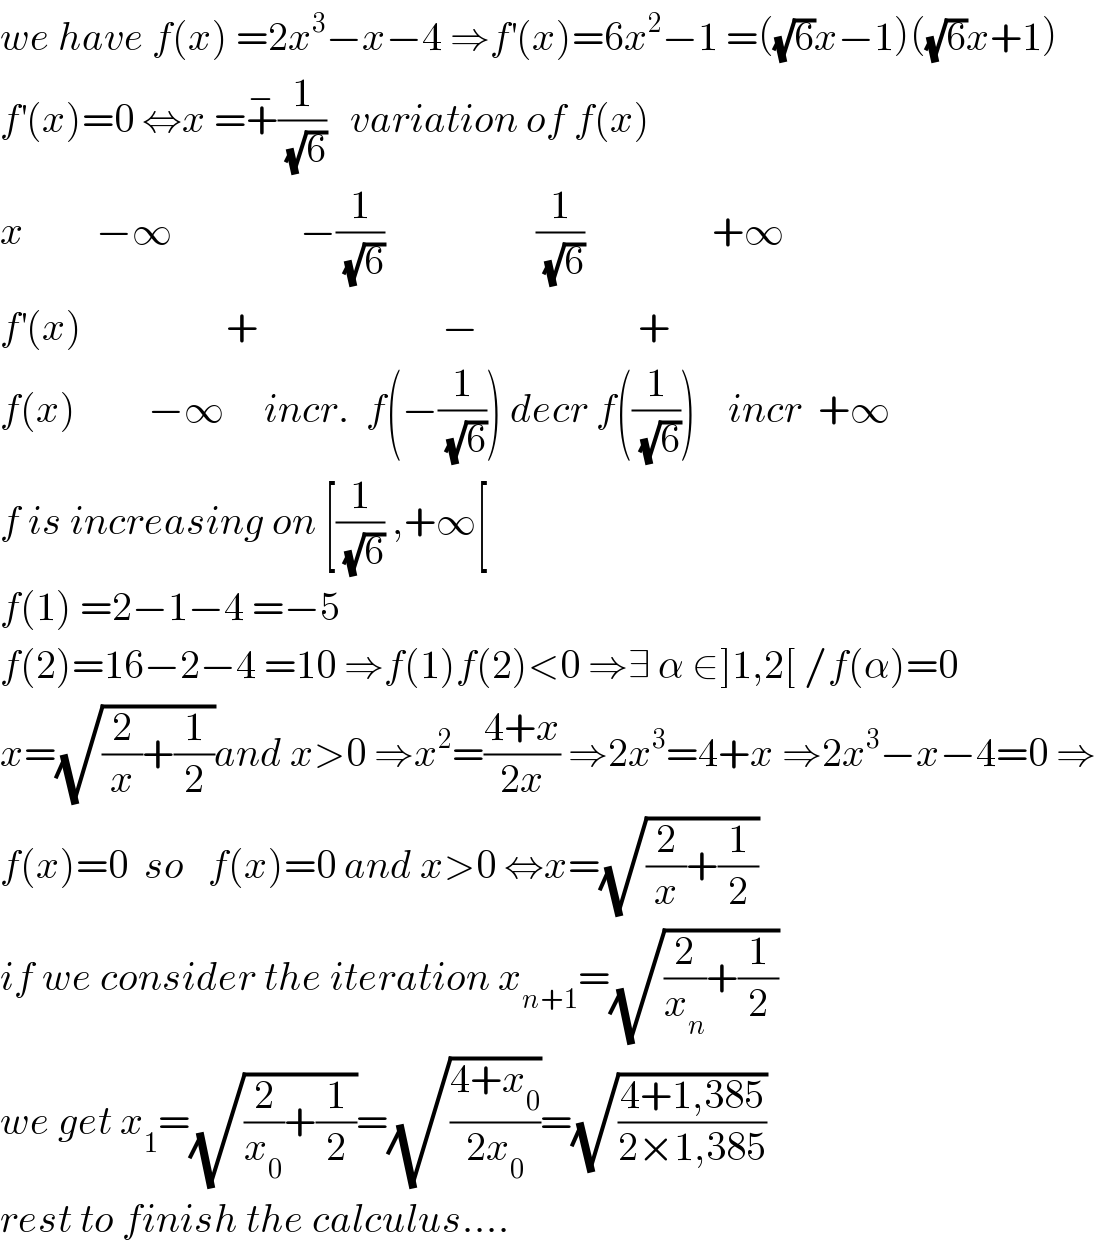 we have f(x) =2x^3 −x−4 ⇒f^′ (x)=6x^2 −1 =((√6)x−1)((√6)x+1)  f^′ (x)=0 ⇔x =+^− (1/(√6))   variation of f(x)  x         −∞                −(1/(√6))                   (1/(√6))                +∞  f^′ (x)                  +                       −                    +  f(x)         −∞     incr.  f(−(1/(√6))) decr f((1/(√6)))    incr  +∞  f is increasing on [(1/(√6)) ,+∞[  f(1) =2−1−4 =−5  f(2)=16−2−4 =10 ⇒f(1)f(2)<0 ⇒∃ α ∈]1,2[ /f(α)=0  x=(√((2/x)+(1/2)))and x>0 ⇒x^2 =((4+x)/(2x)) ⇒2x^3 =4+x ⇒2x^3 −x−4=0 ⇒  f(x)=0  so   f(x)=0 and x>0 ⇔x=(√((2/x)+(1/2)))  if we consider the iteration x_(n+1) =(√((2/x_n )+(1/2)))  we get x_1 =(√((2/x_0 )+(1/2)))=(√((4+x_0 )/(2x_0 )))=(√((4+1,385)/(2×1,385)))  rest to finish the calculus....  